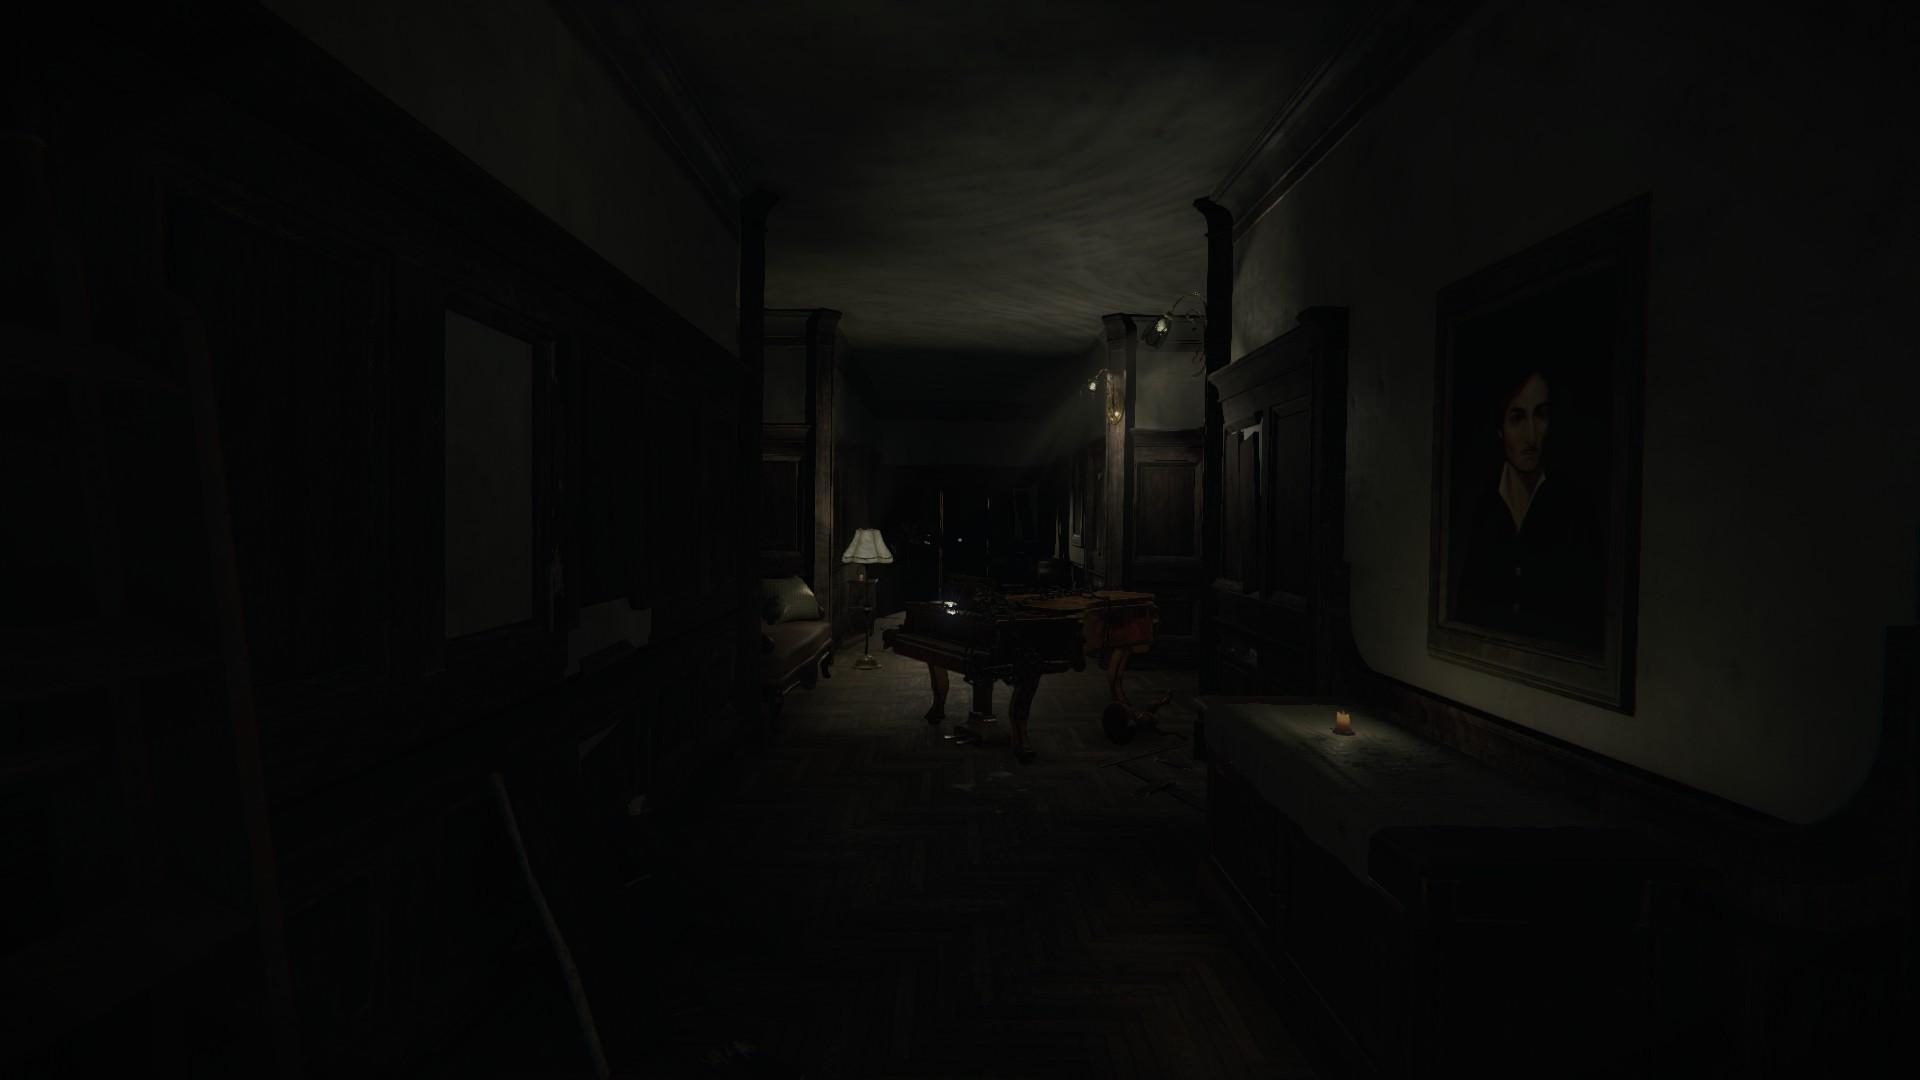 Layers of Fear review: An unsettling subversion